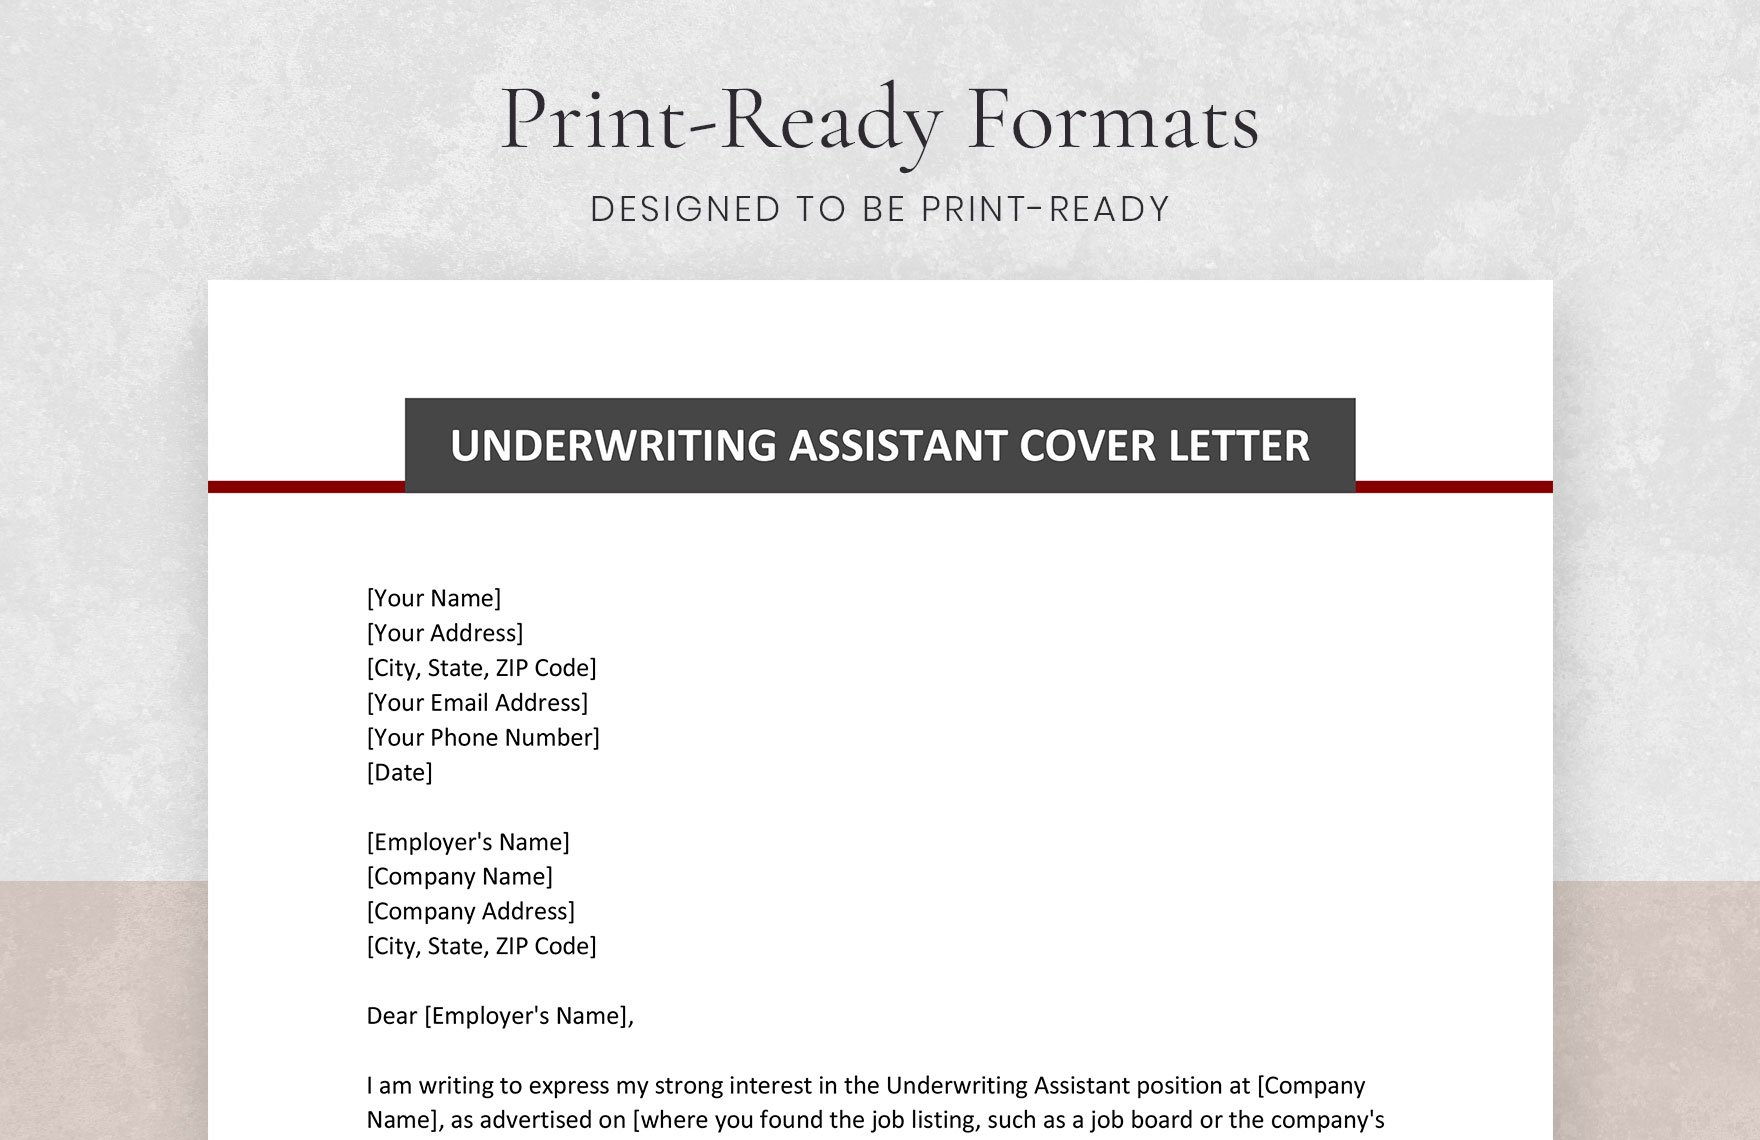 Underwriting Assistant Cover Letter